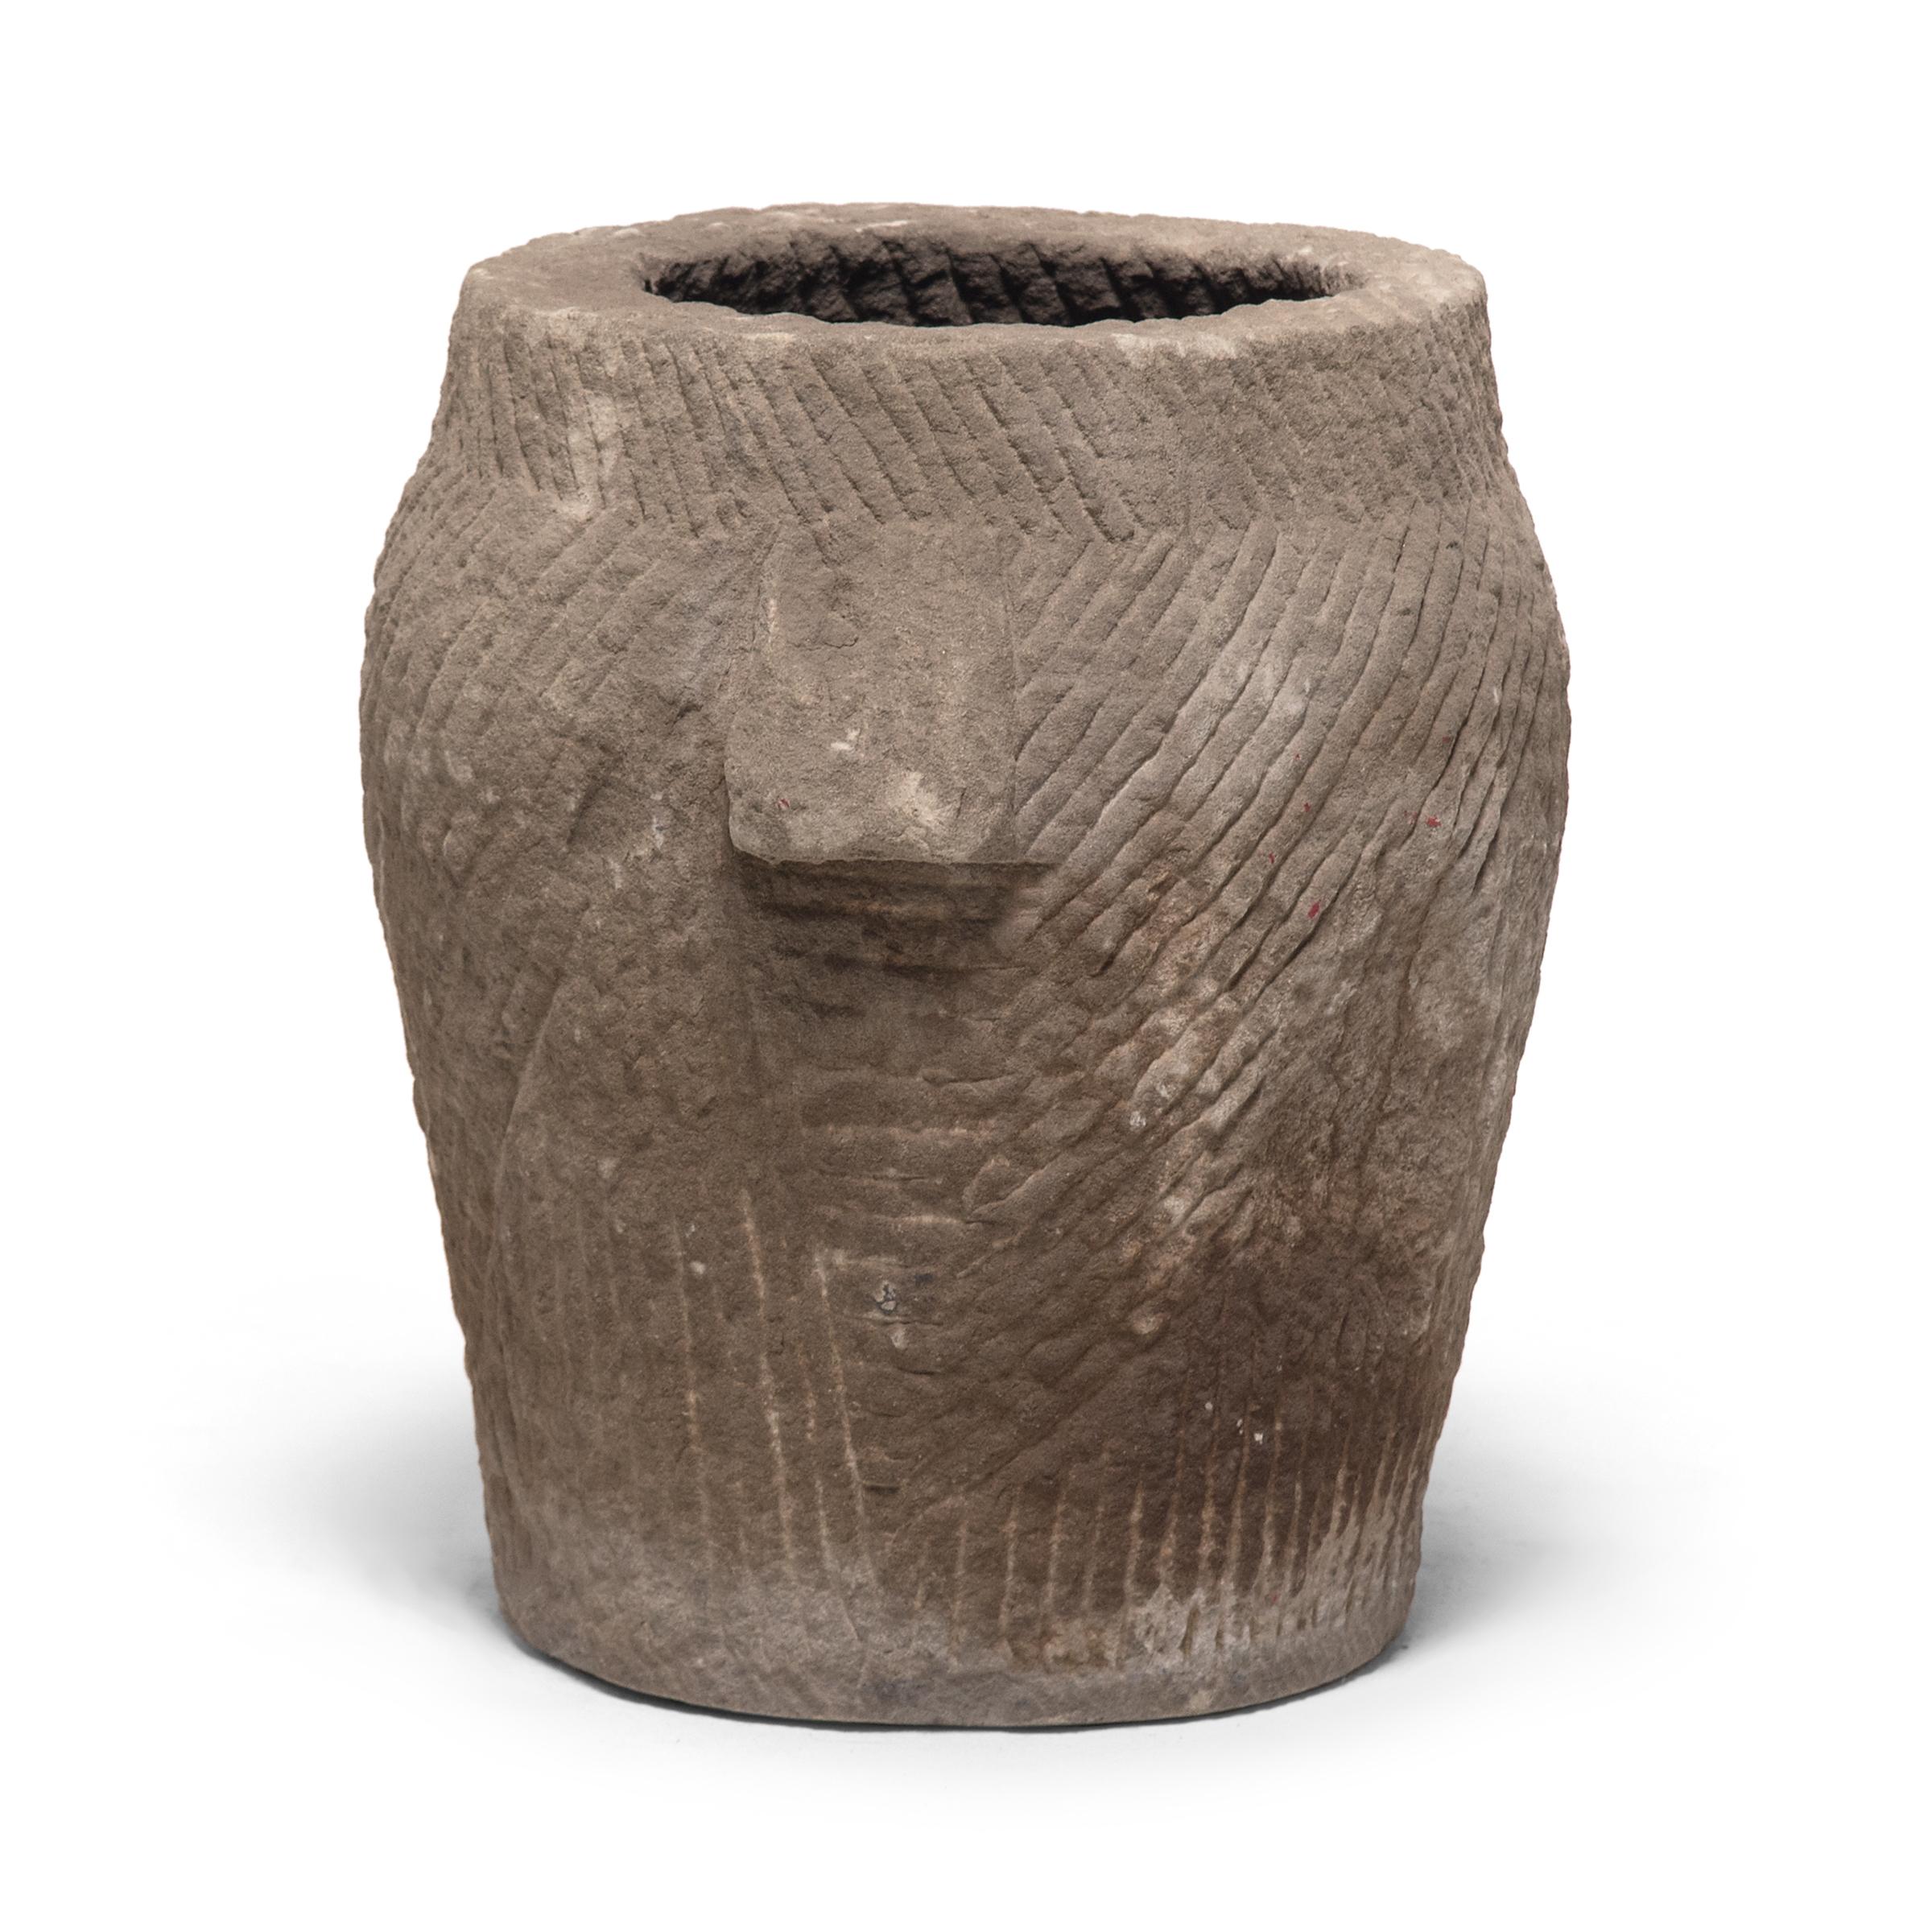 Essentially a utilitarian vessel, this mortar is textured with etched line work to facilitate the task of removing the outer husks from grains of rice. Yet it seems as if the Qing-dynasty artisan who carved the mortar from limestone became